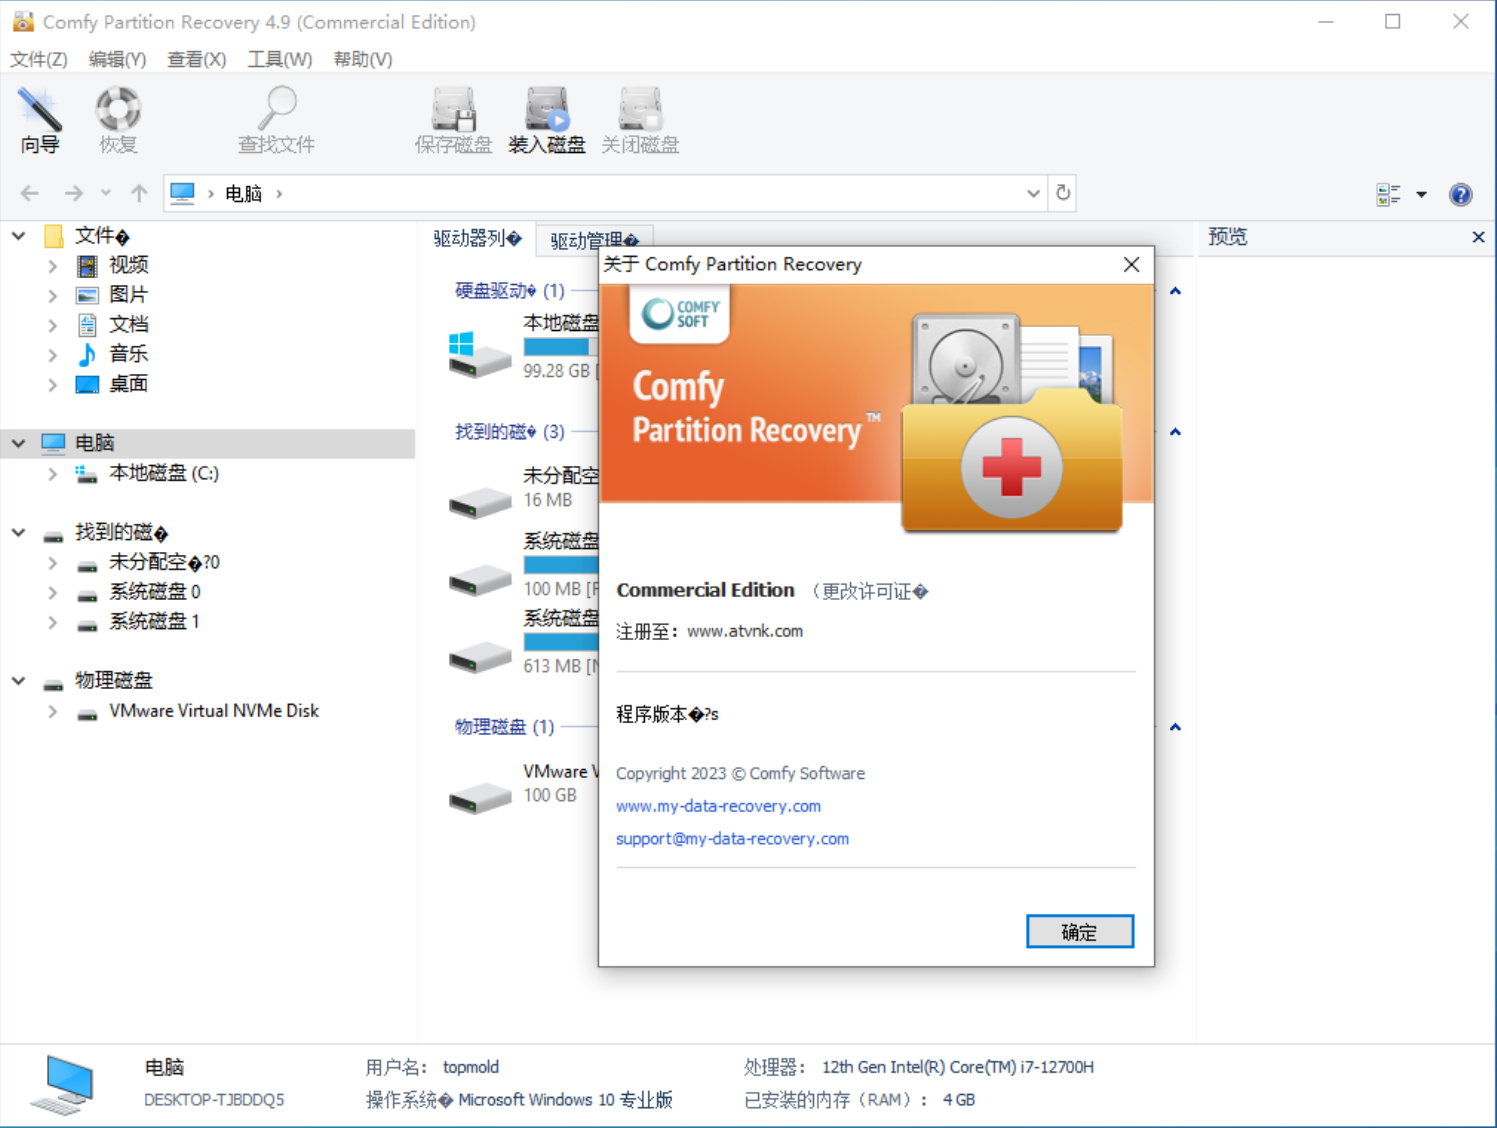 Comfy Partition Recovery v4.9.0 Commercial Edition Multilingual 中文注册版